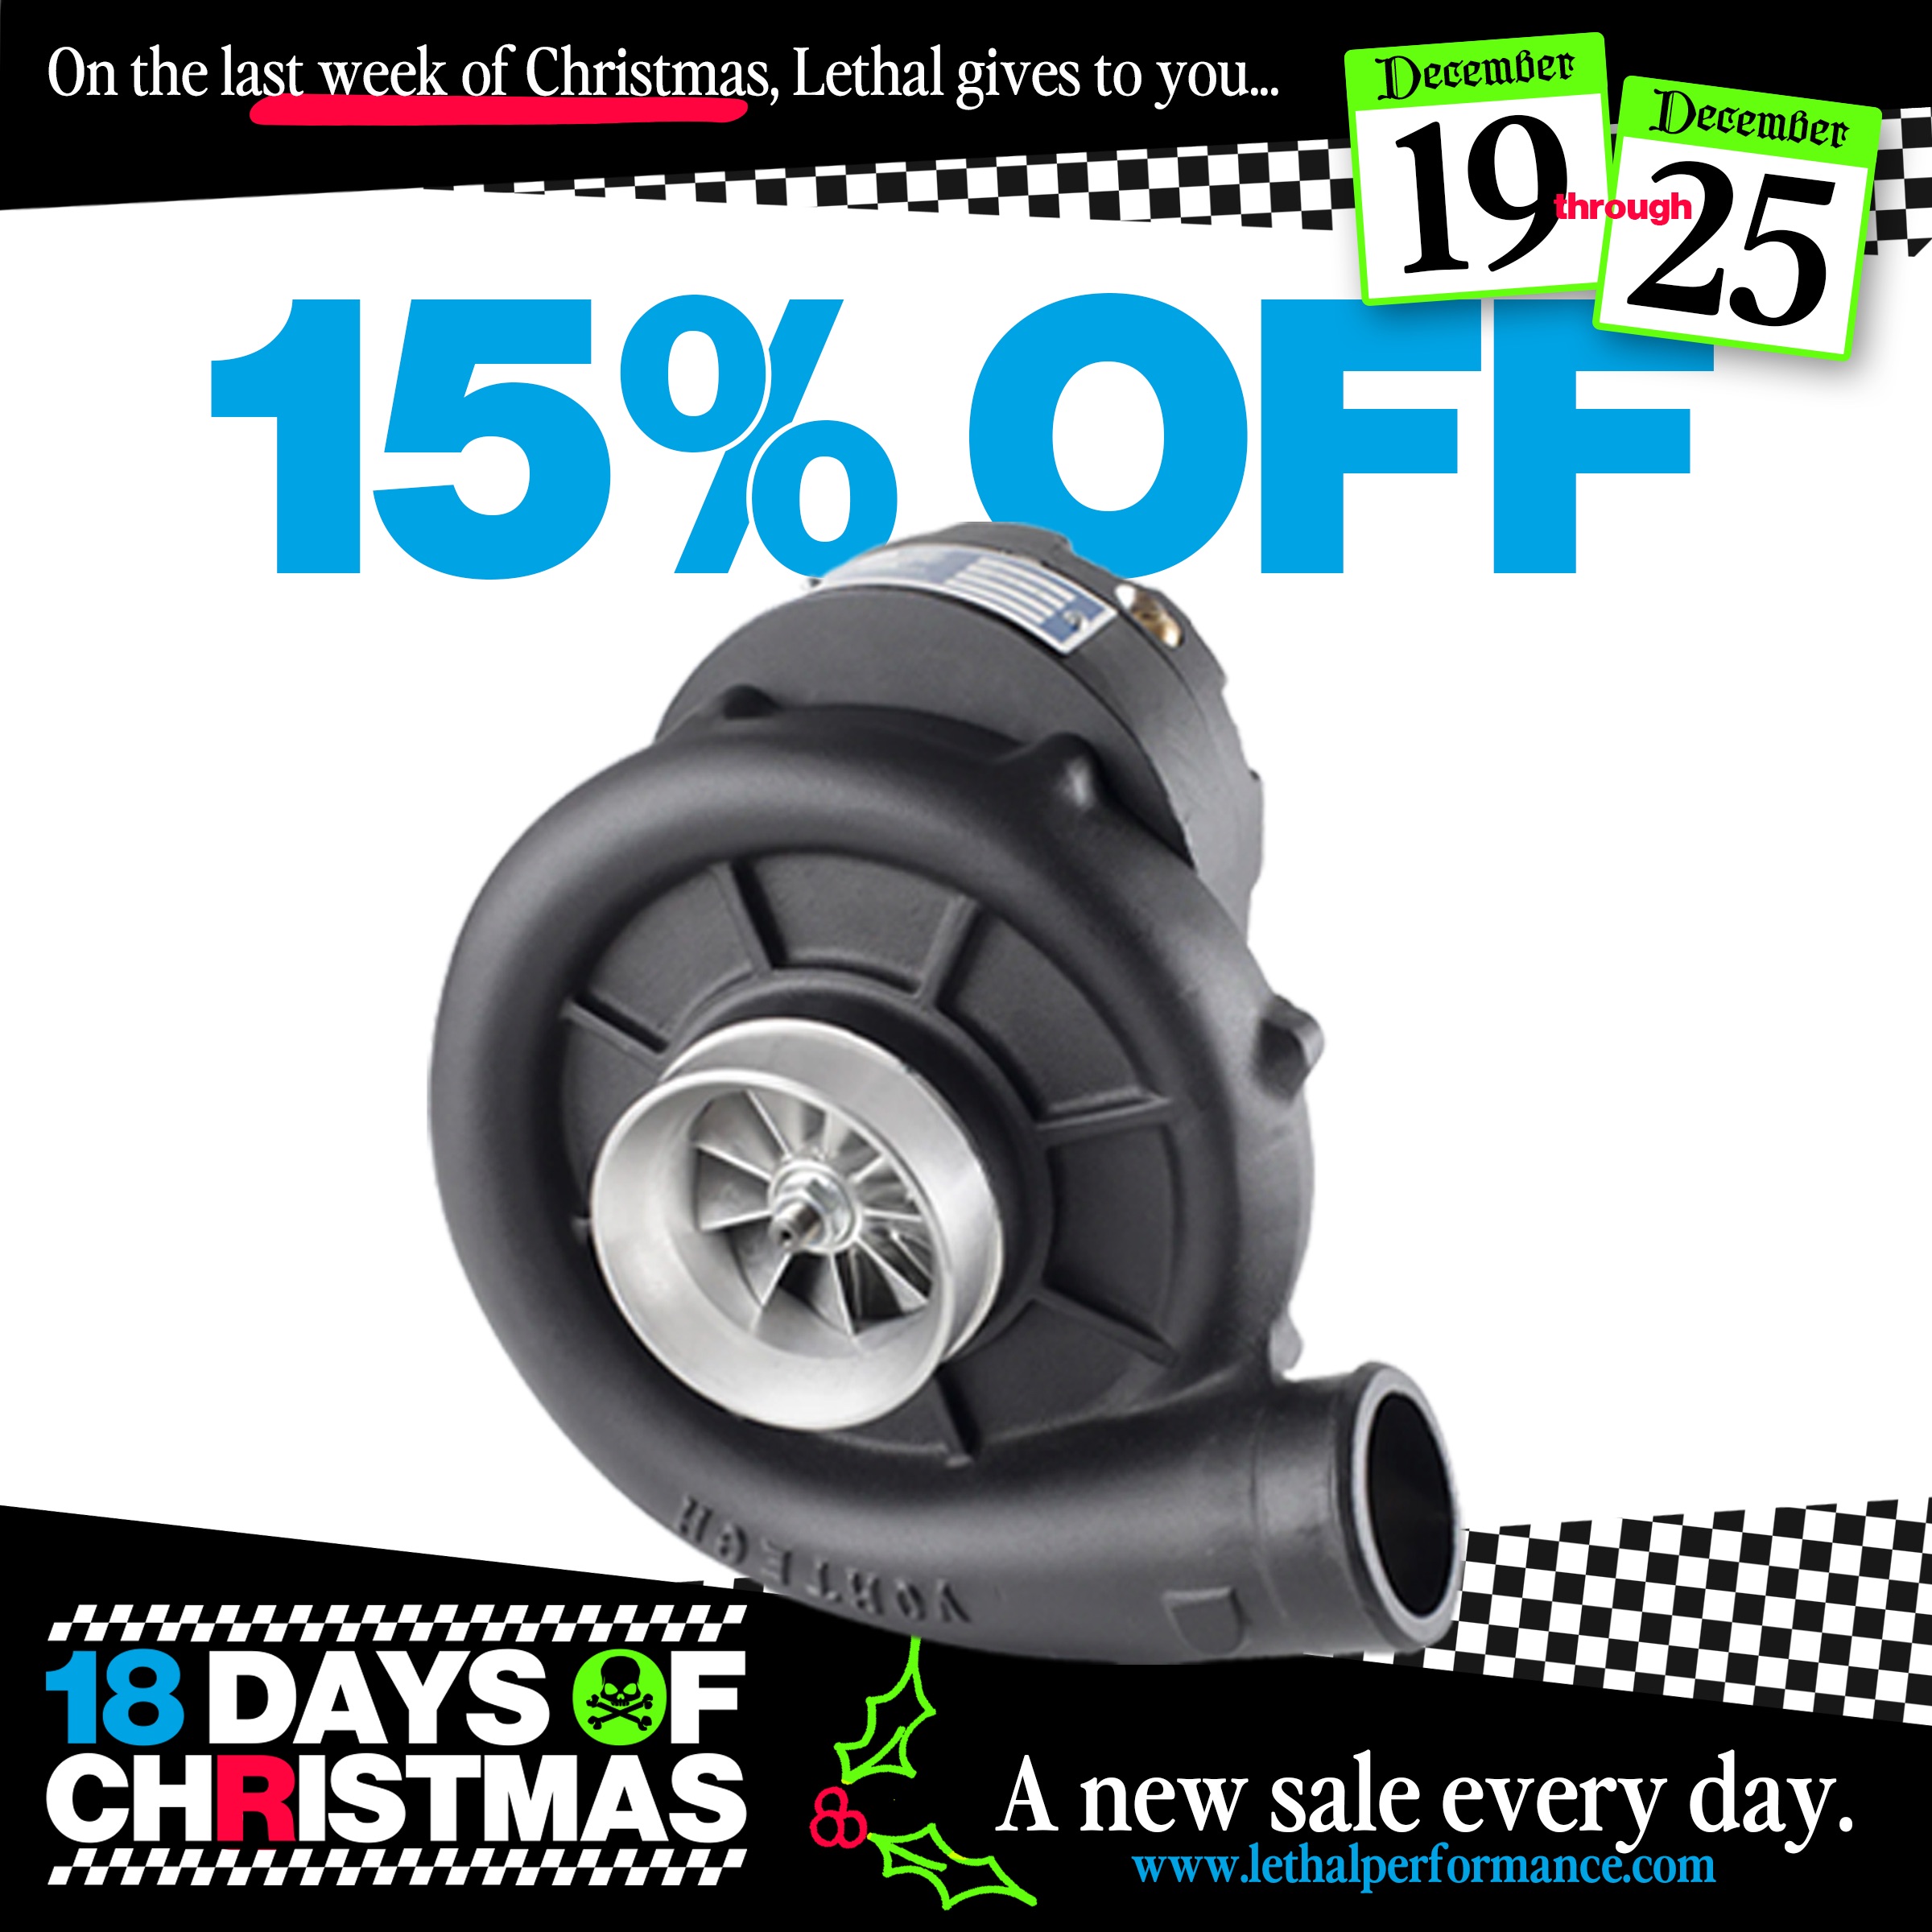 S650 Mustang Lethal Perfomance's 18 Days of Christmas SALES START NOW!! Vortech